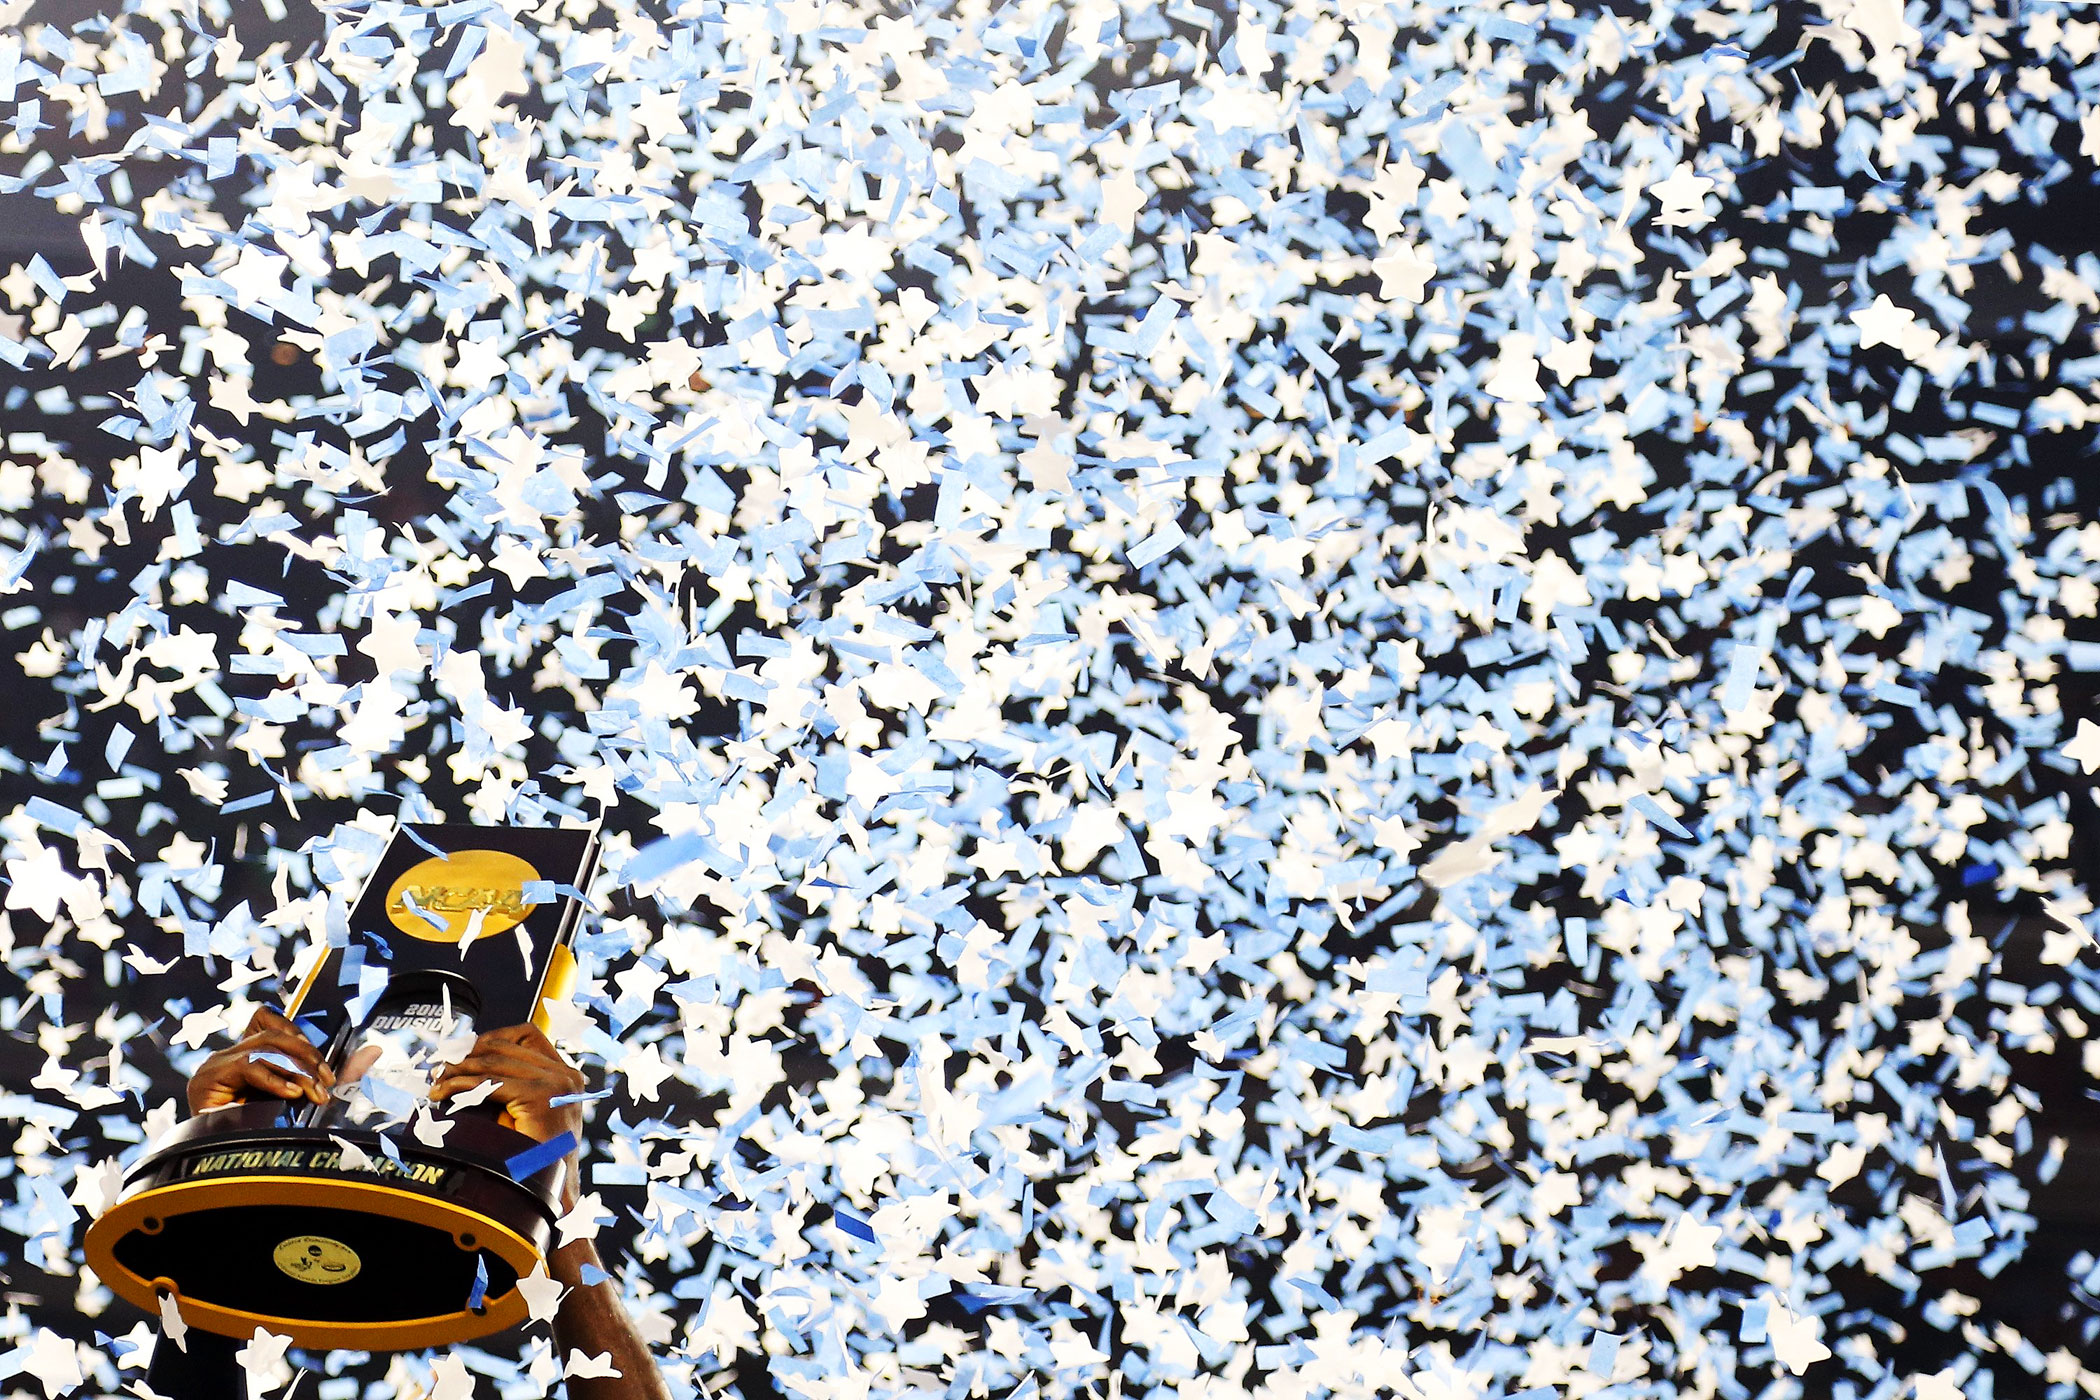 The Villanova Wildcats hoist the trophy after defeating the North Carolina Tar Heels 77-74 to win the NCAA college basketball National Championship game on April 4, 2016 in Houston.